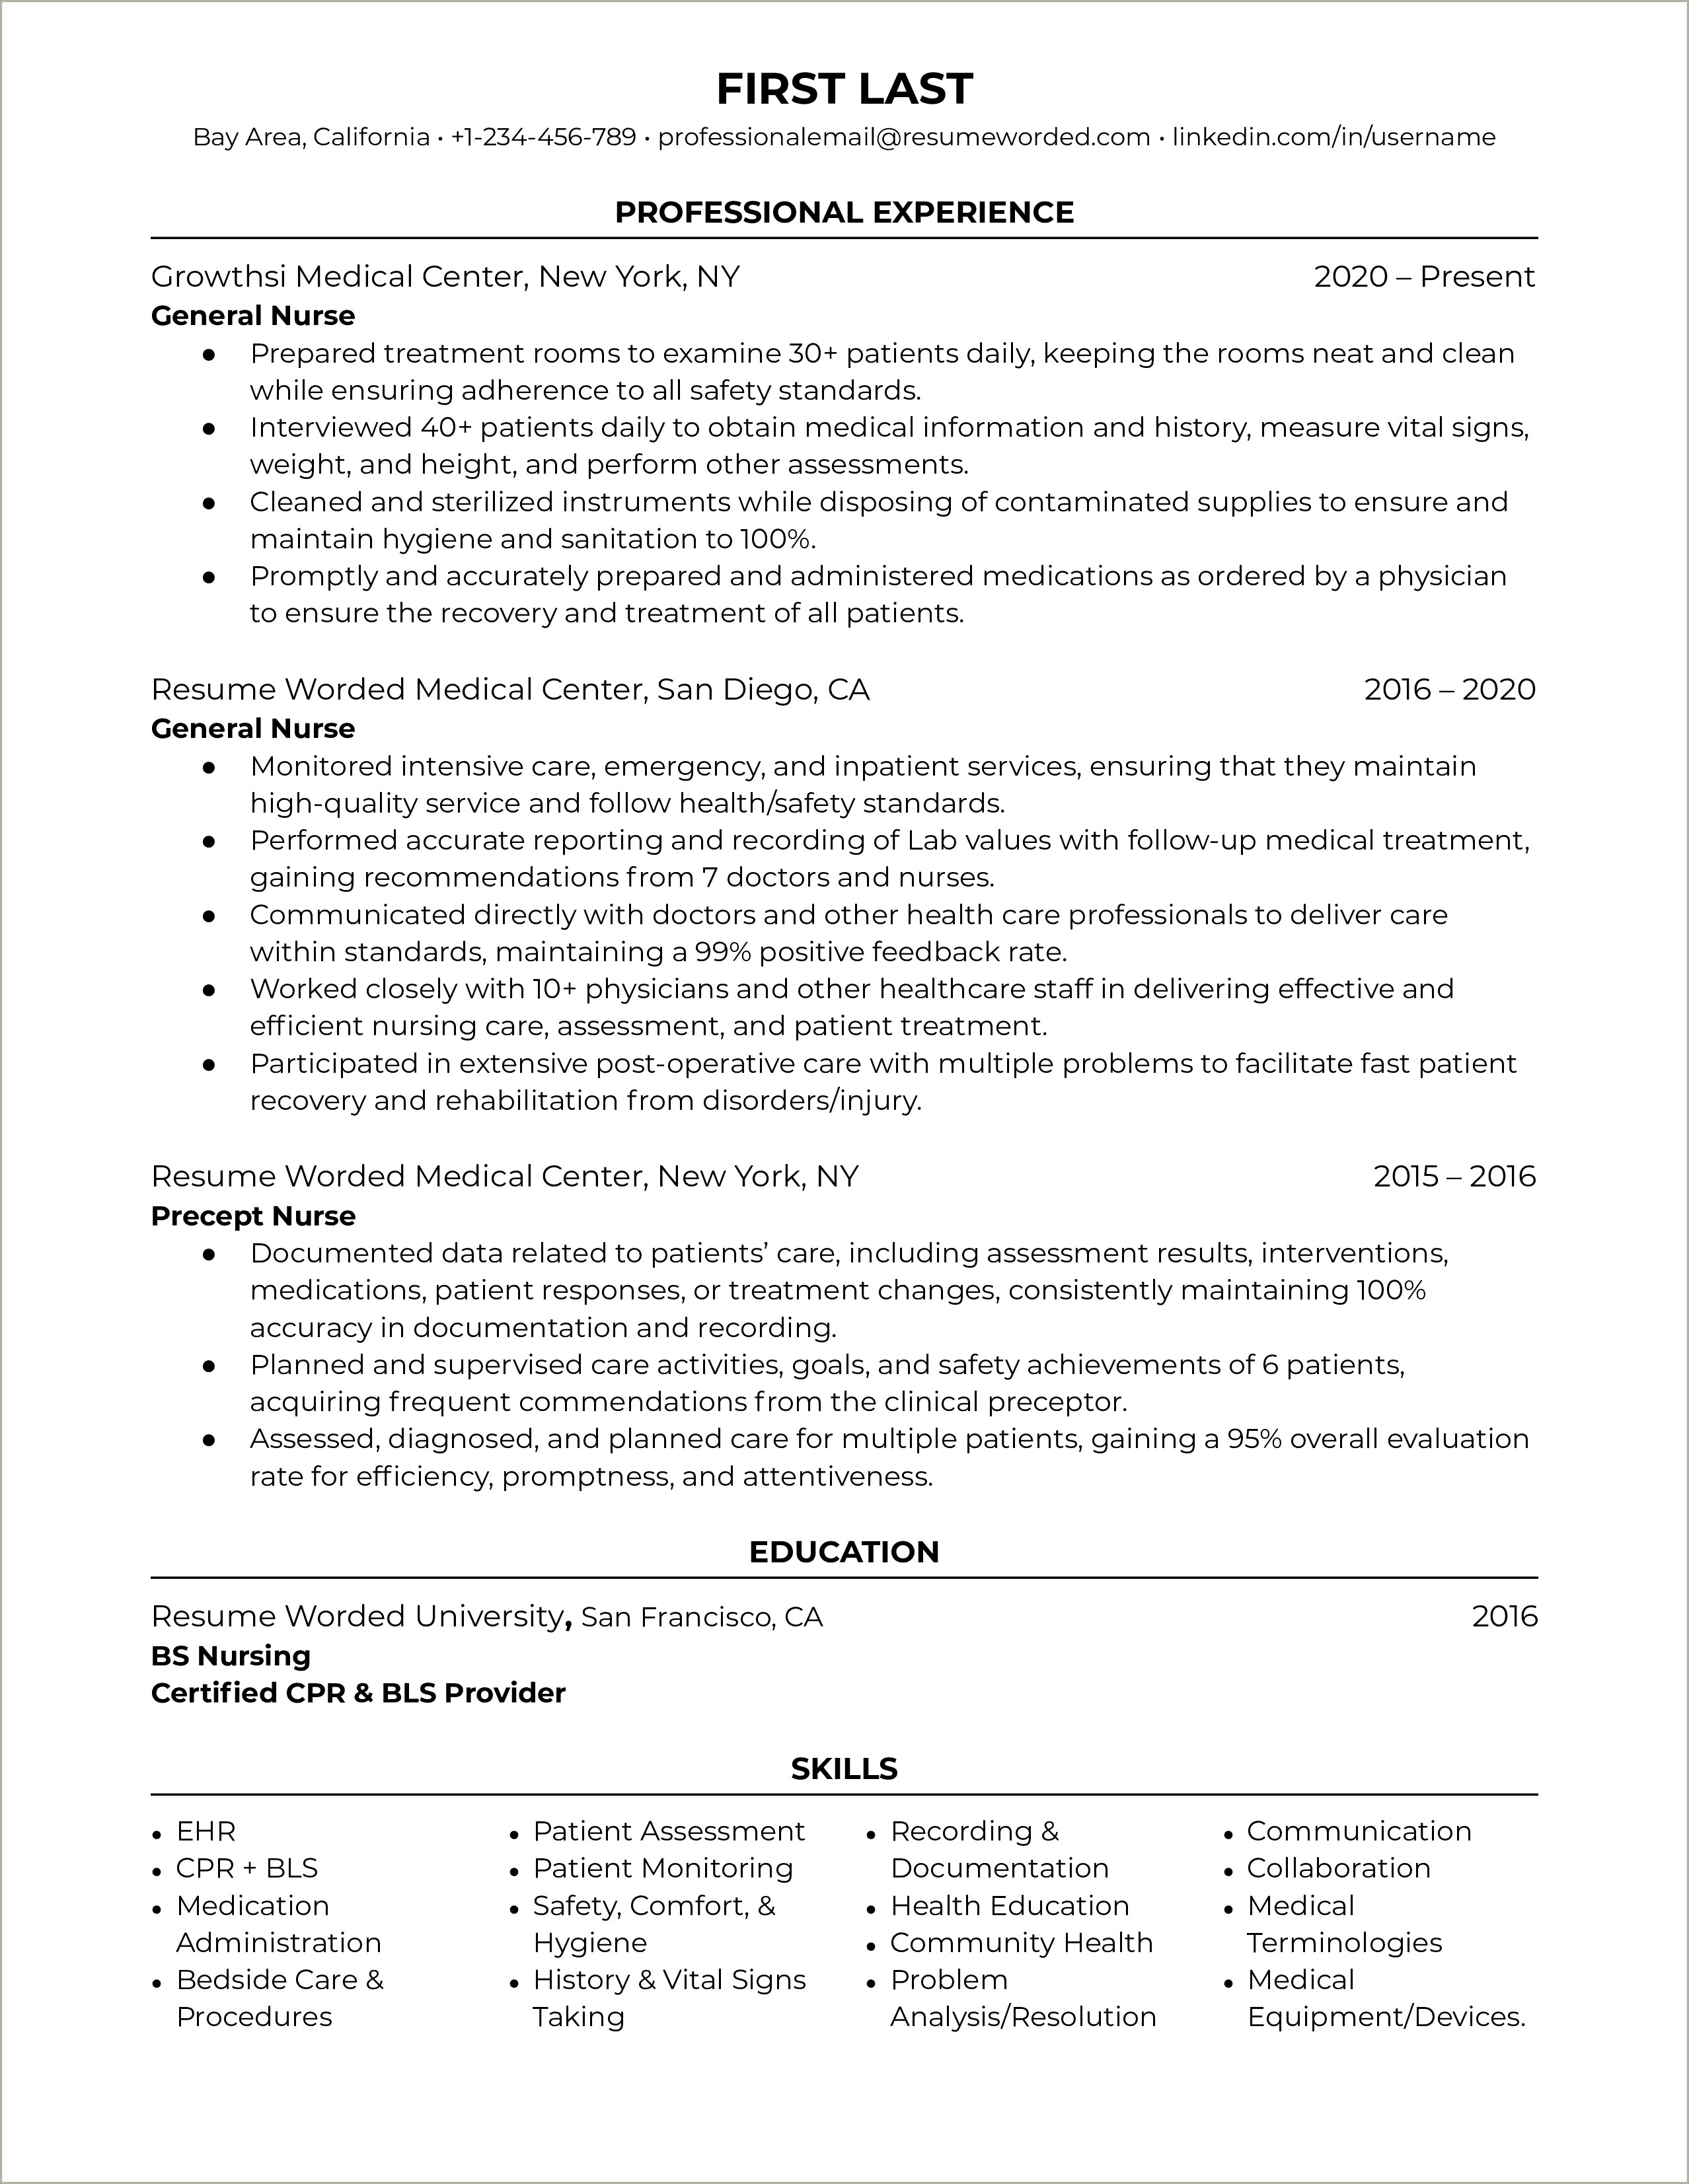 Sample Resume With Gpa Listed - Resume Example Gallery